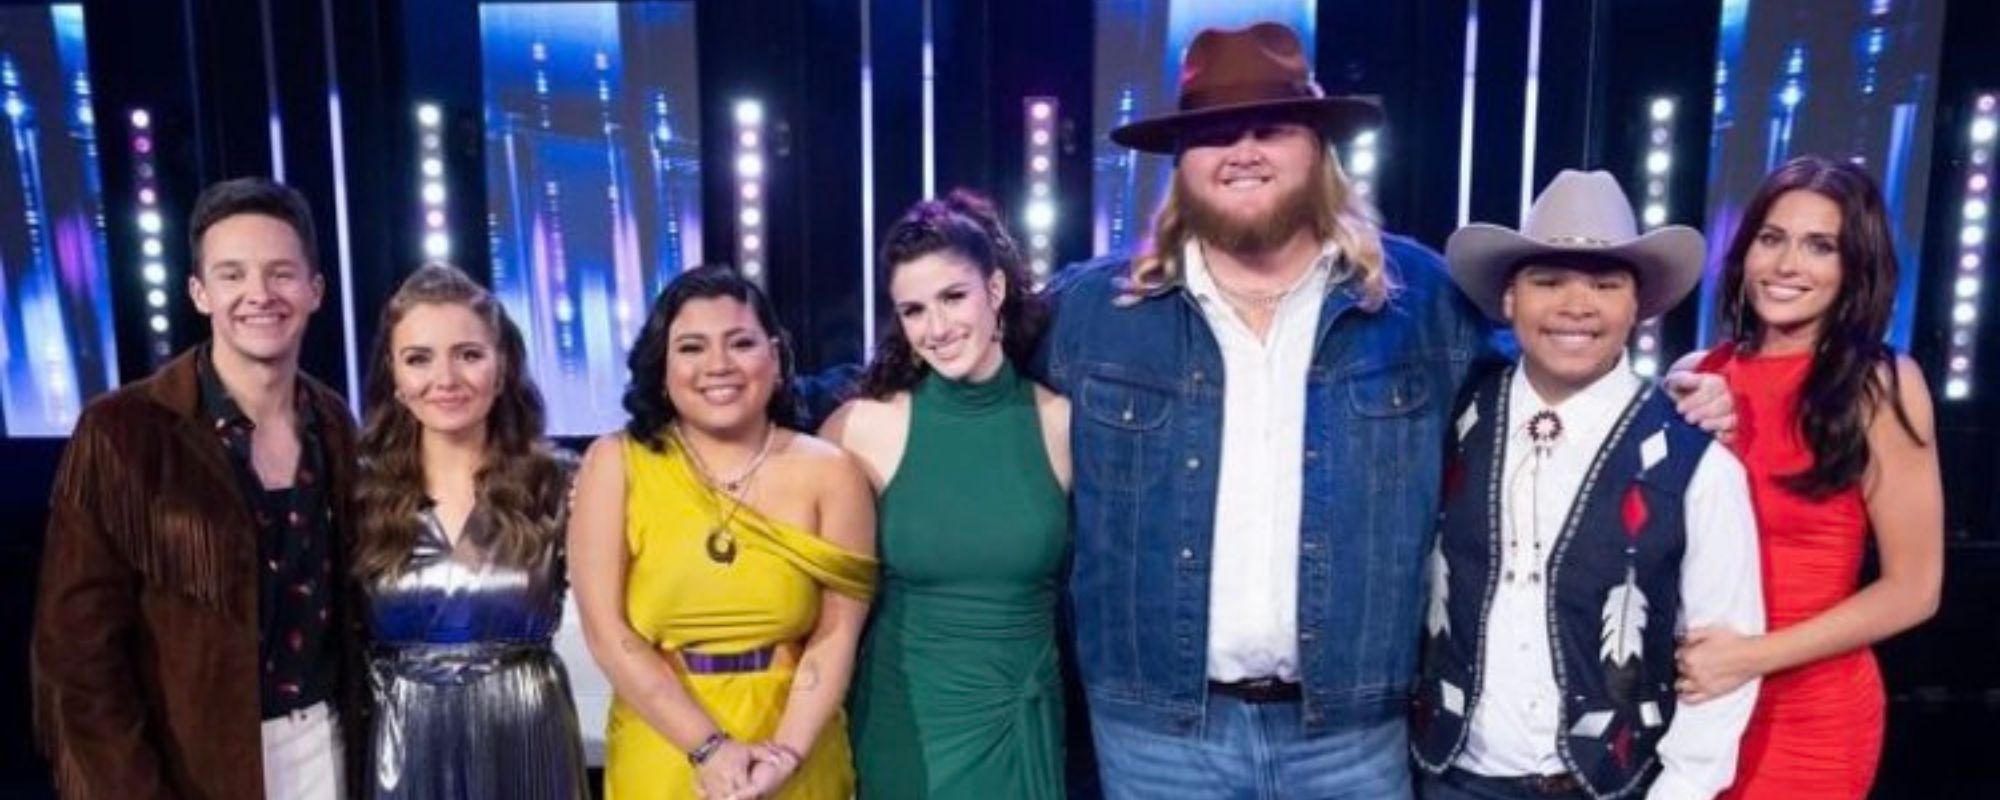 Did Loretta Lynn’s Granddaughter Emmy Russell Make the Top 5? ‘American Idol’ Results, Reactions